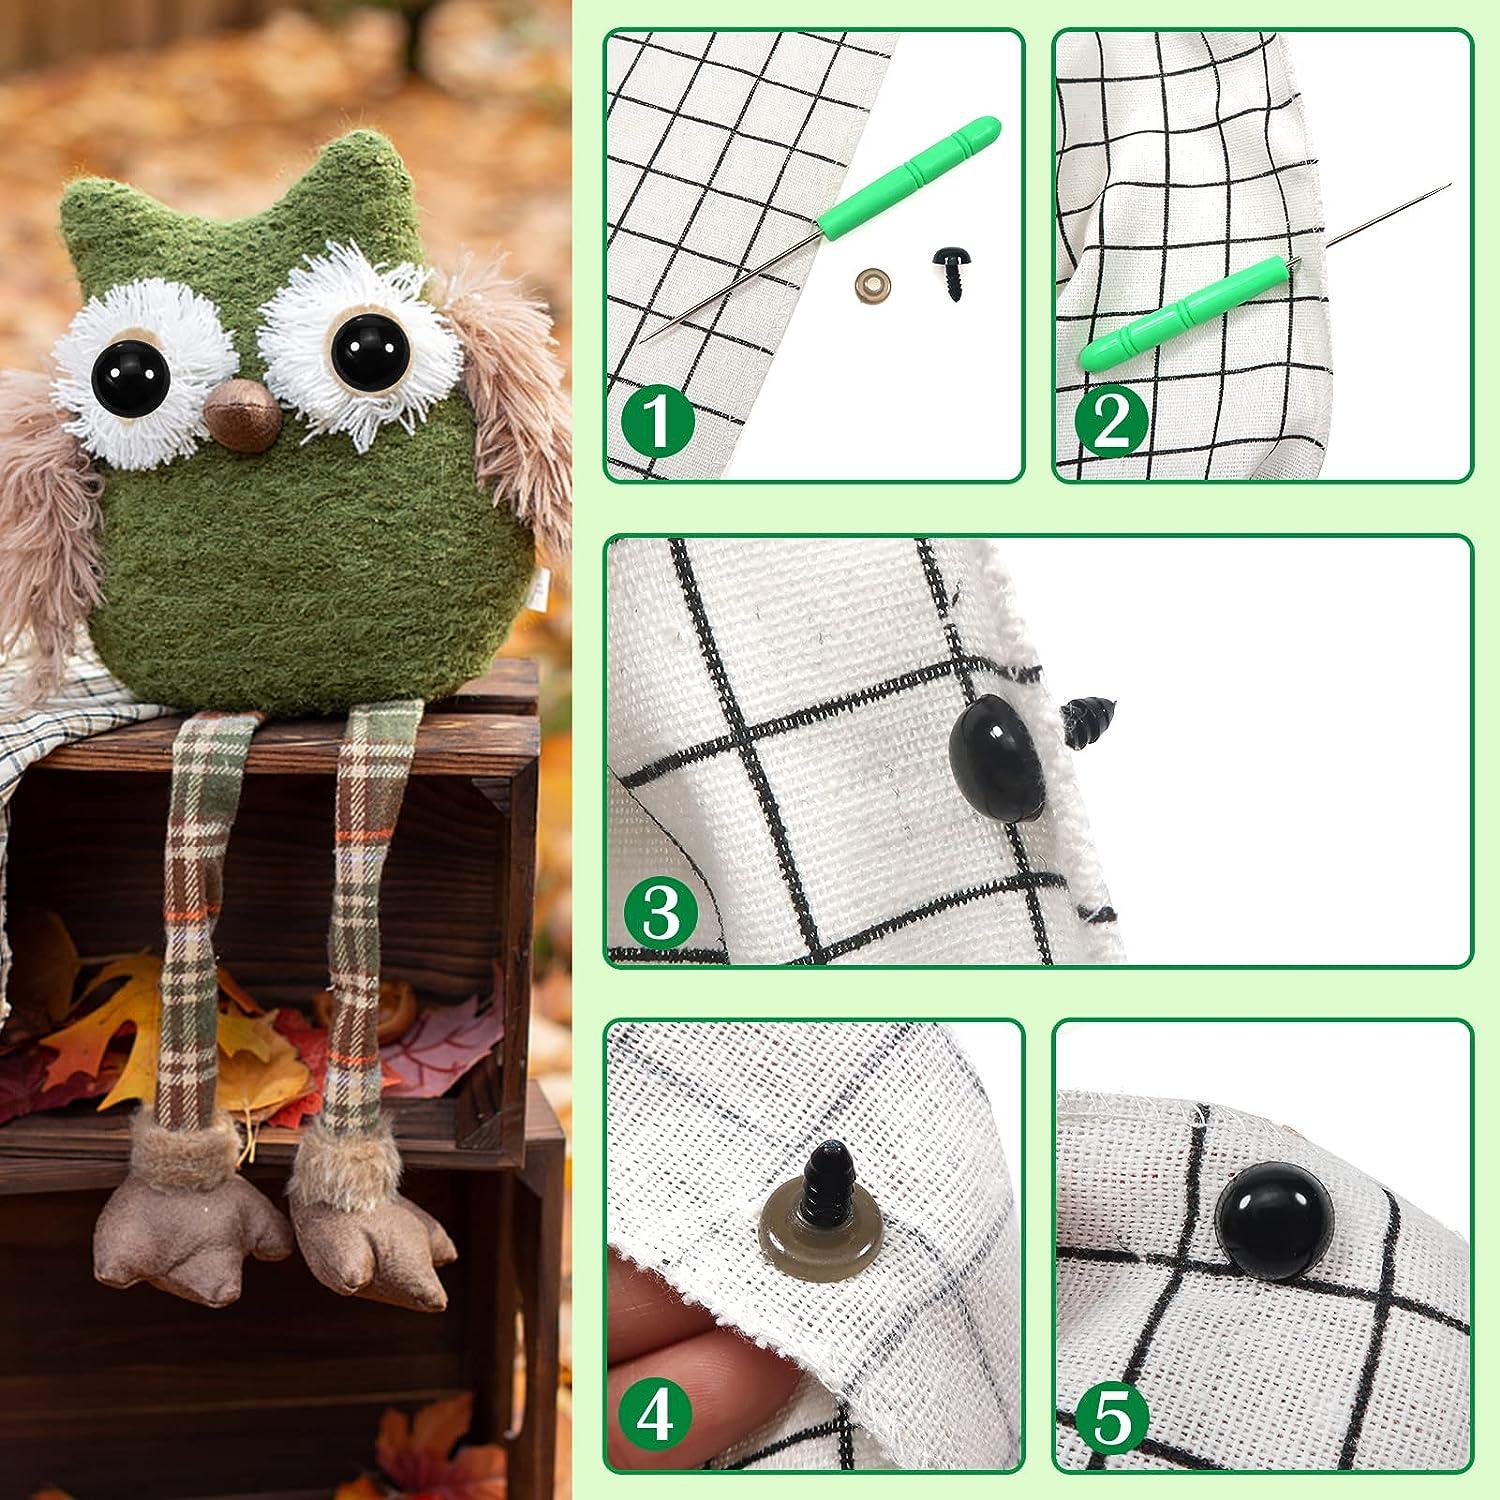 How To - Melting Safety Eyes - A Menagerie of Stitches